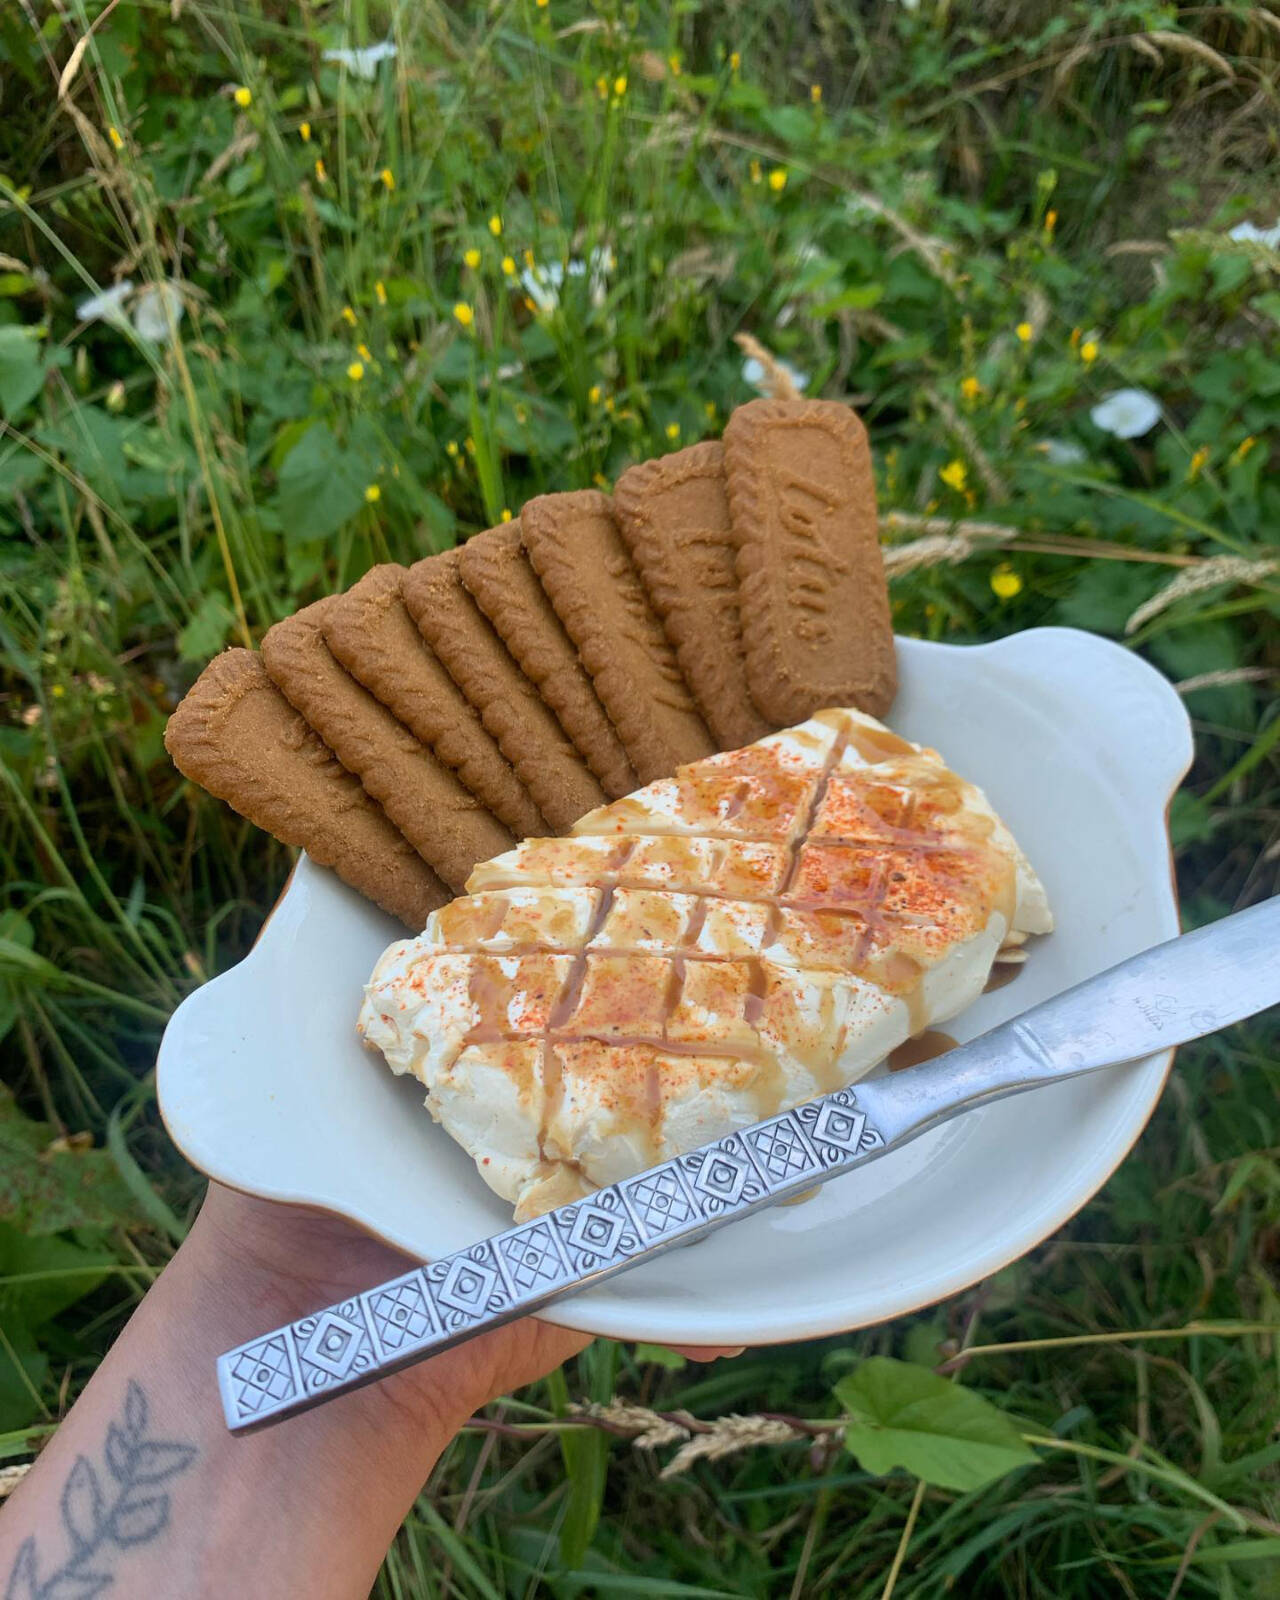 Photo courtesy of Shultz Smokehouse / Try smoked cream cheese at the Shultz Smokehouse booth at the Sequim Farmers & Artisans Market each Saturday throughout the summer.